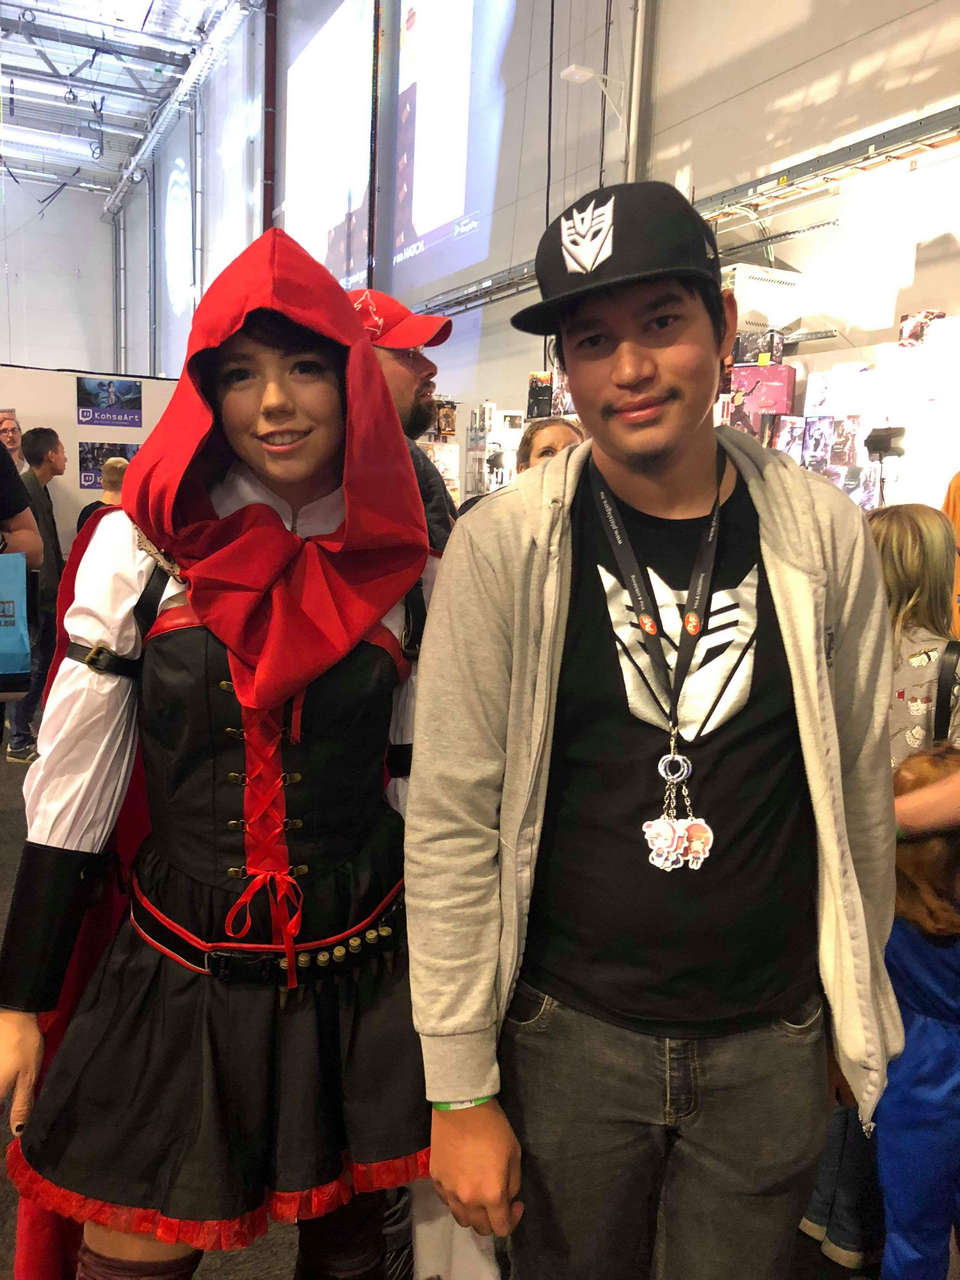 I Found A Ruby Cosplayer In Comic Con Stockholm Yesterda